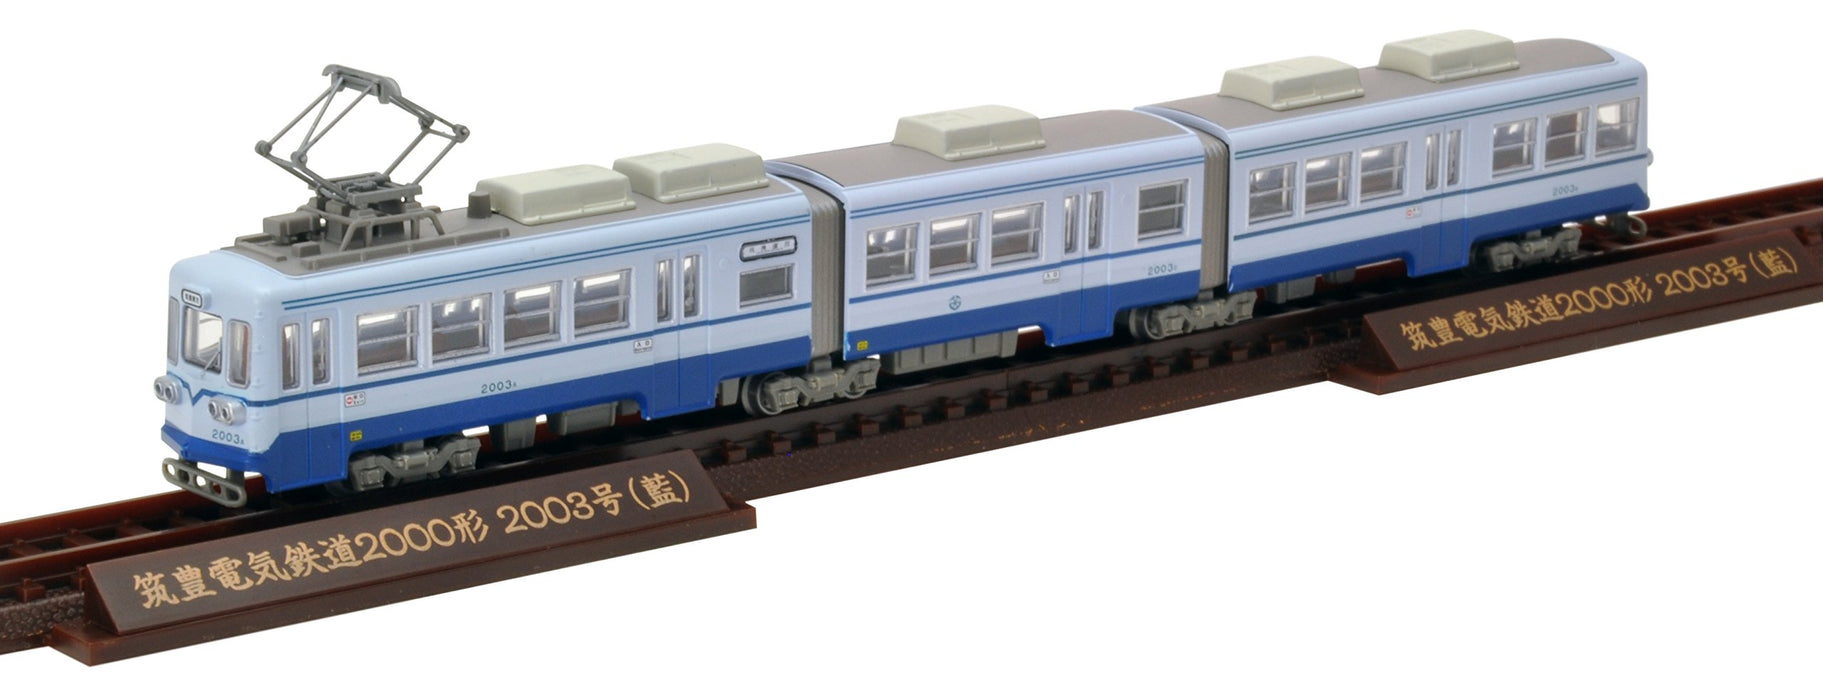 TOMYTEC Chikuho Electric Railway Type 2000 No.2003 Blue N Scale